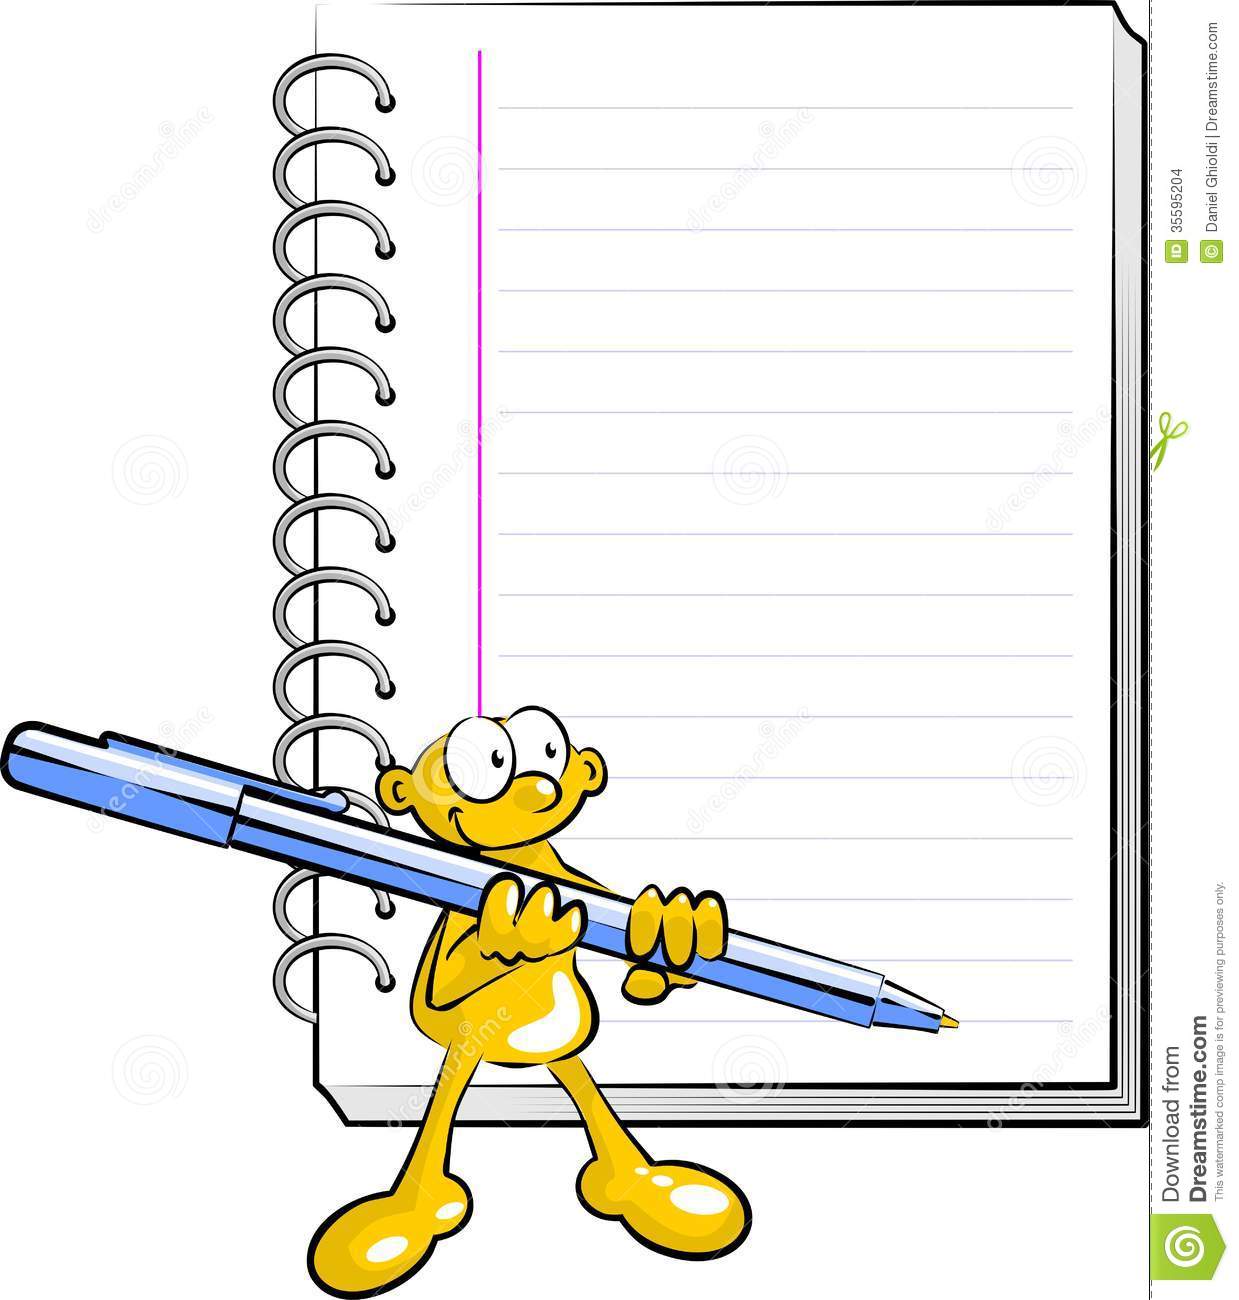     Pen Standing In Front Of A Notebook With Sheets To Write Your Message